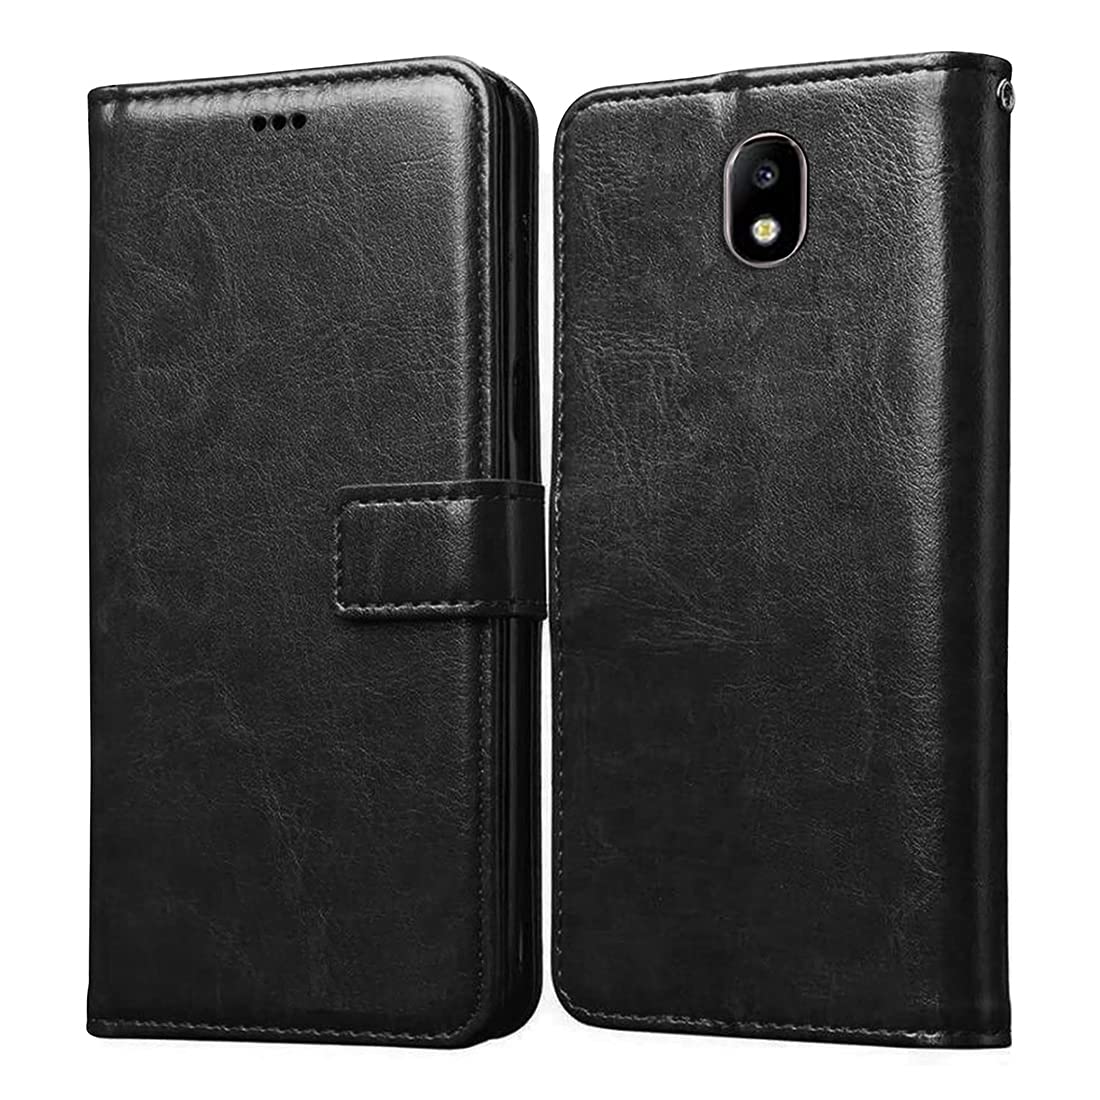 Buy Samsung Galaxy J7 Pro Mobile Back Covers